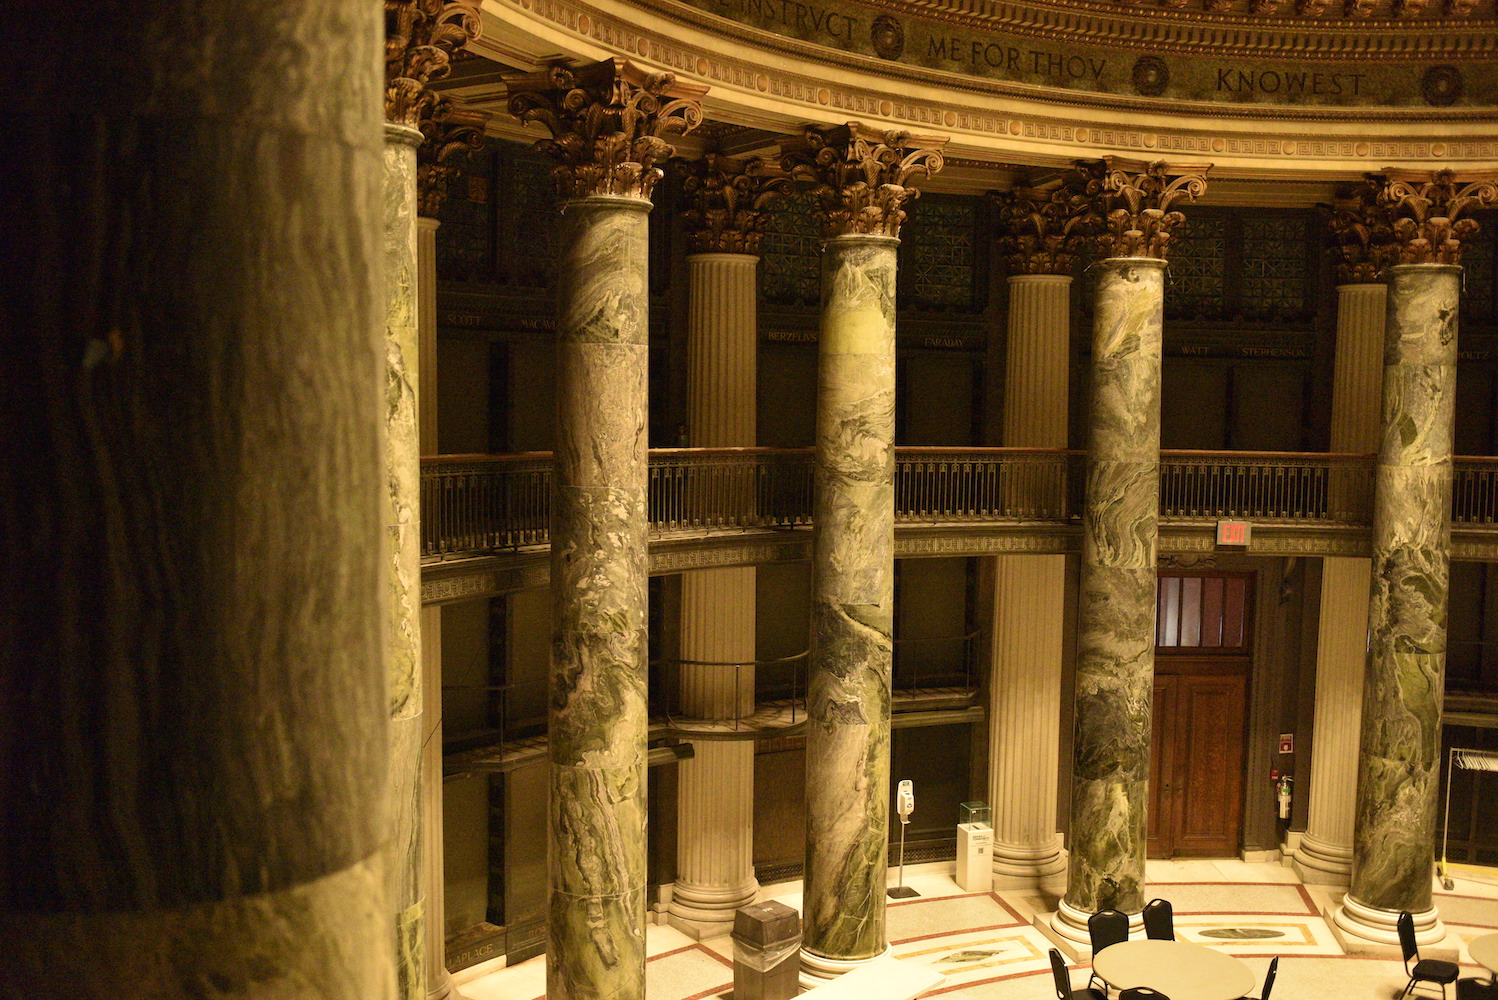 The interior of the library features columns, patterns and statues.